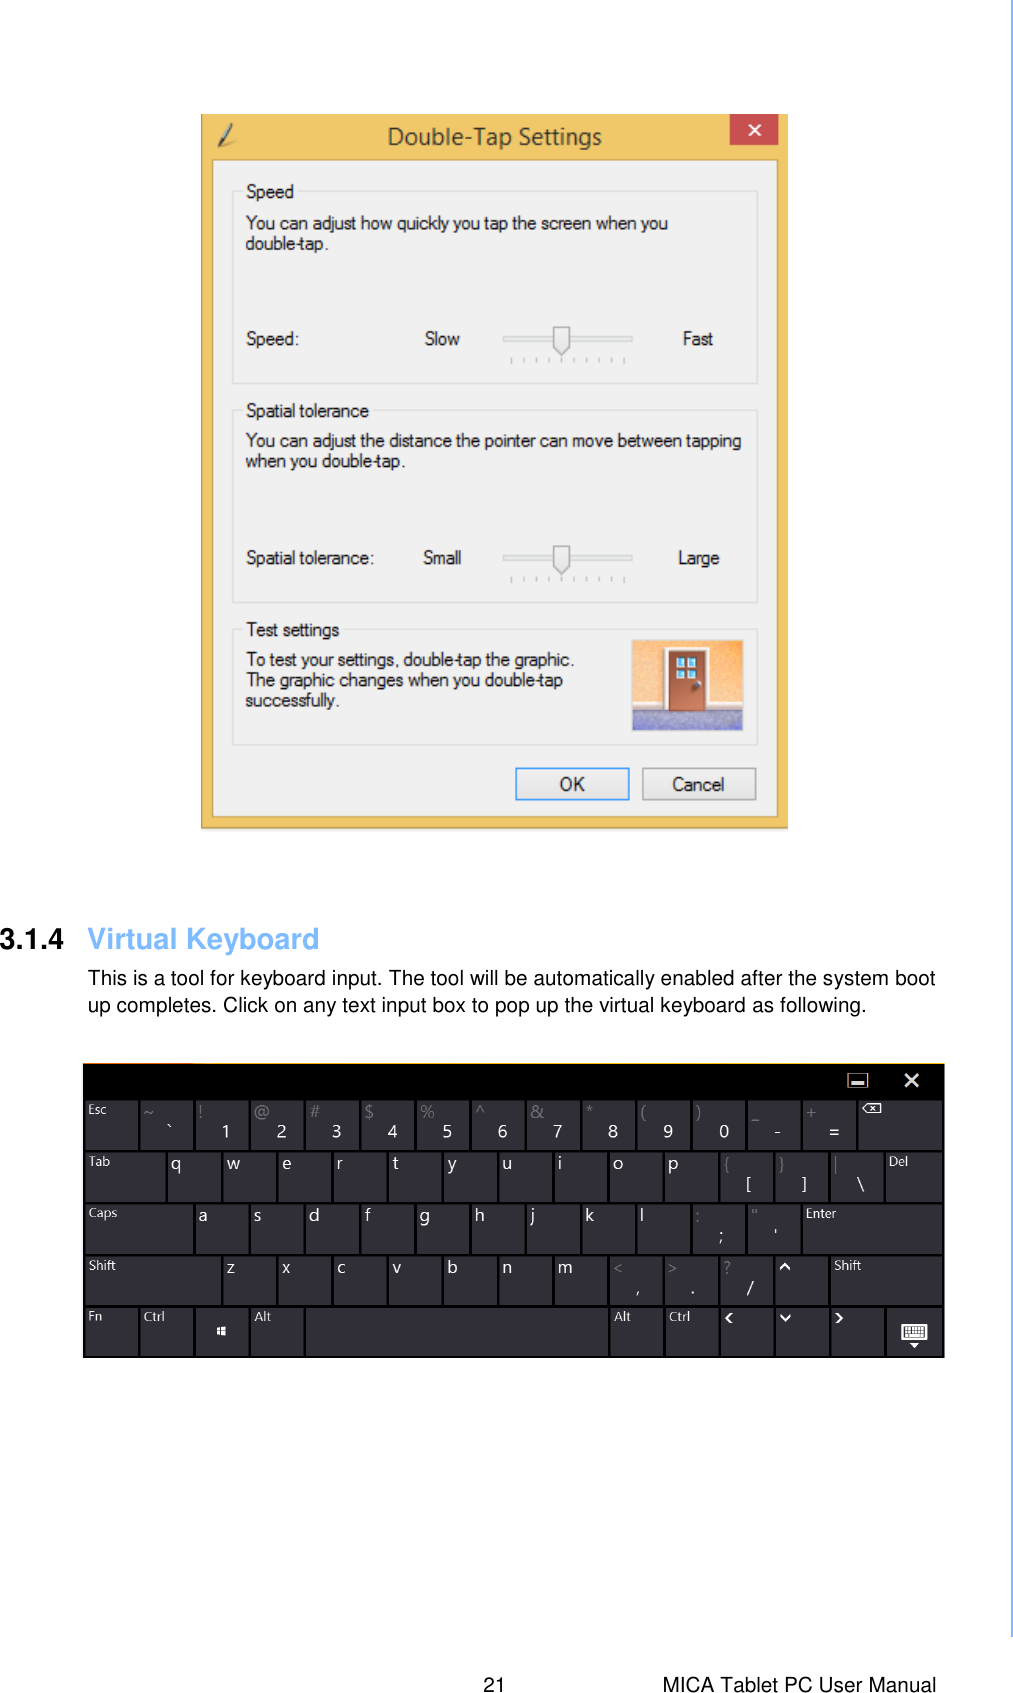  21  MICA Tablet PC User Manual 3.1.4  Virtual Keyboard This is a tool for keyboard input. The tool will be automatically enabled after the system boot up completes. Click on any text input box to pop up the virtual keyboard as following.     